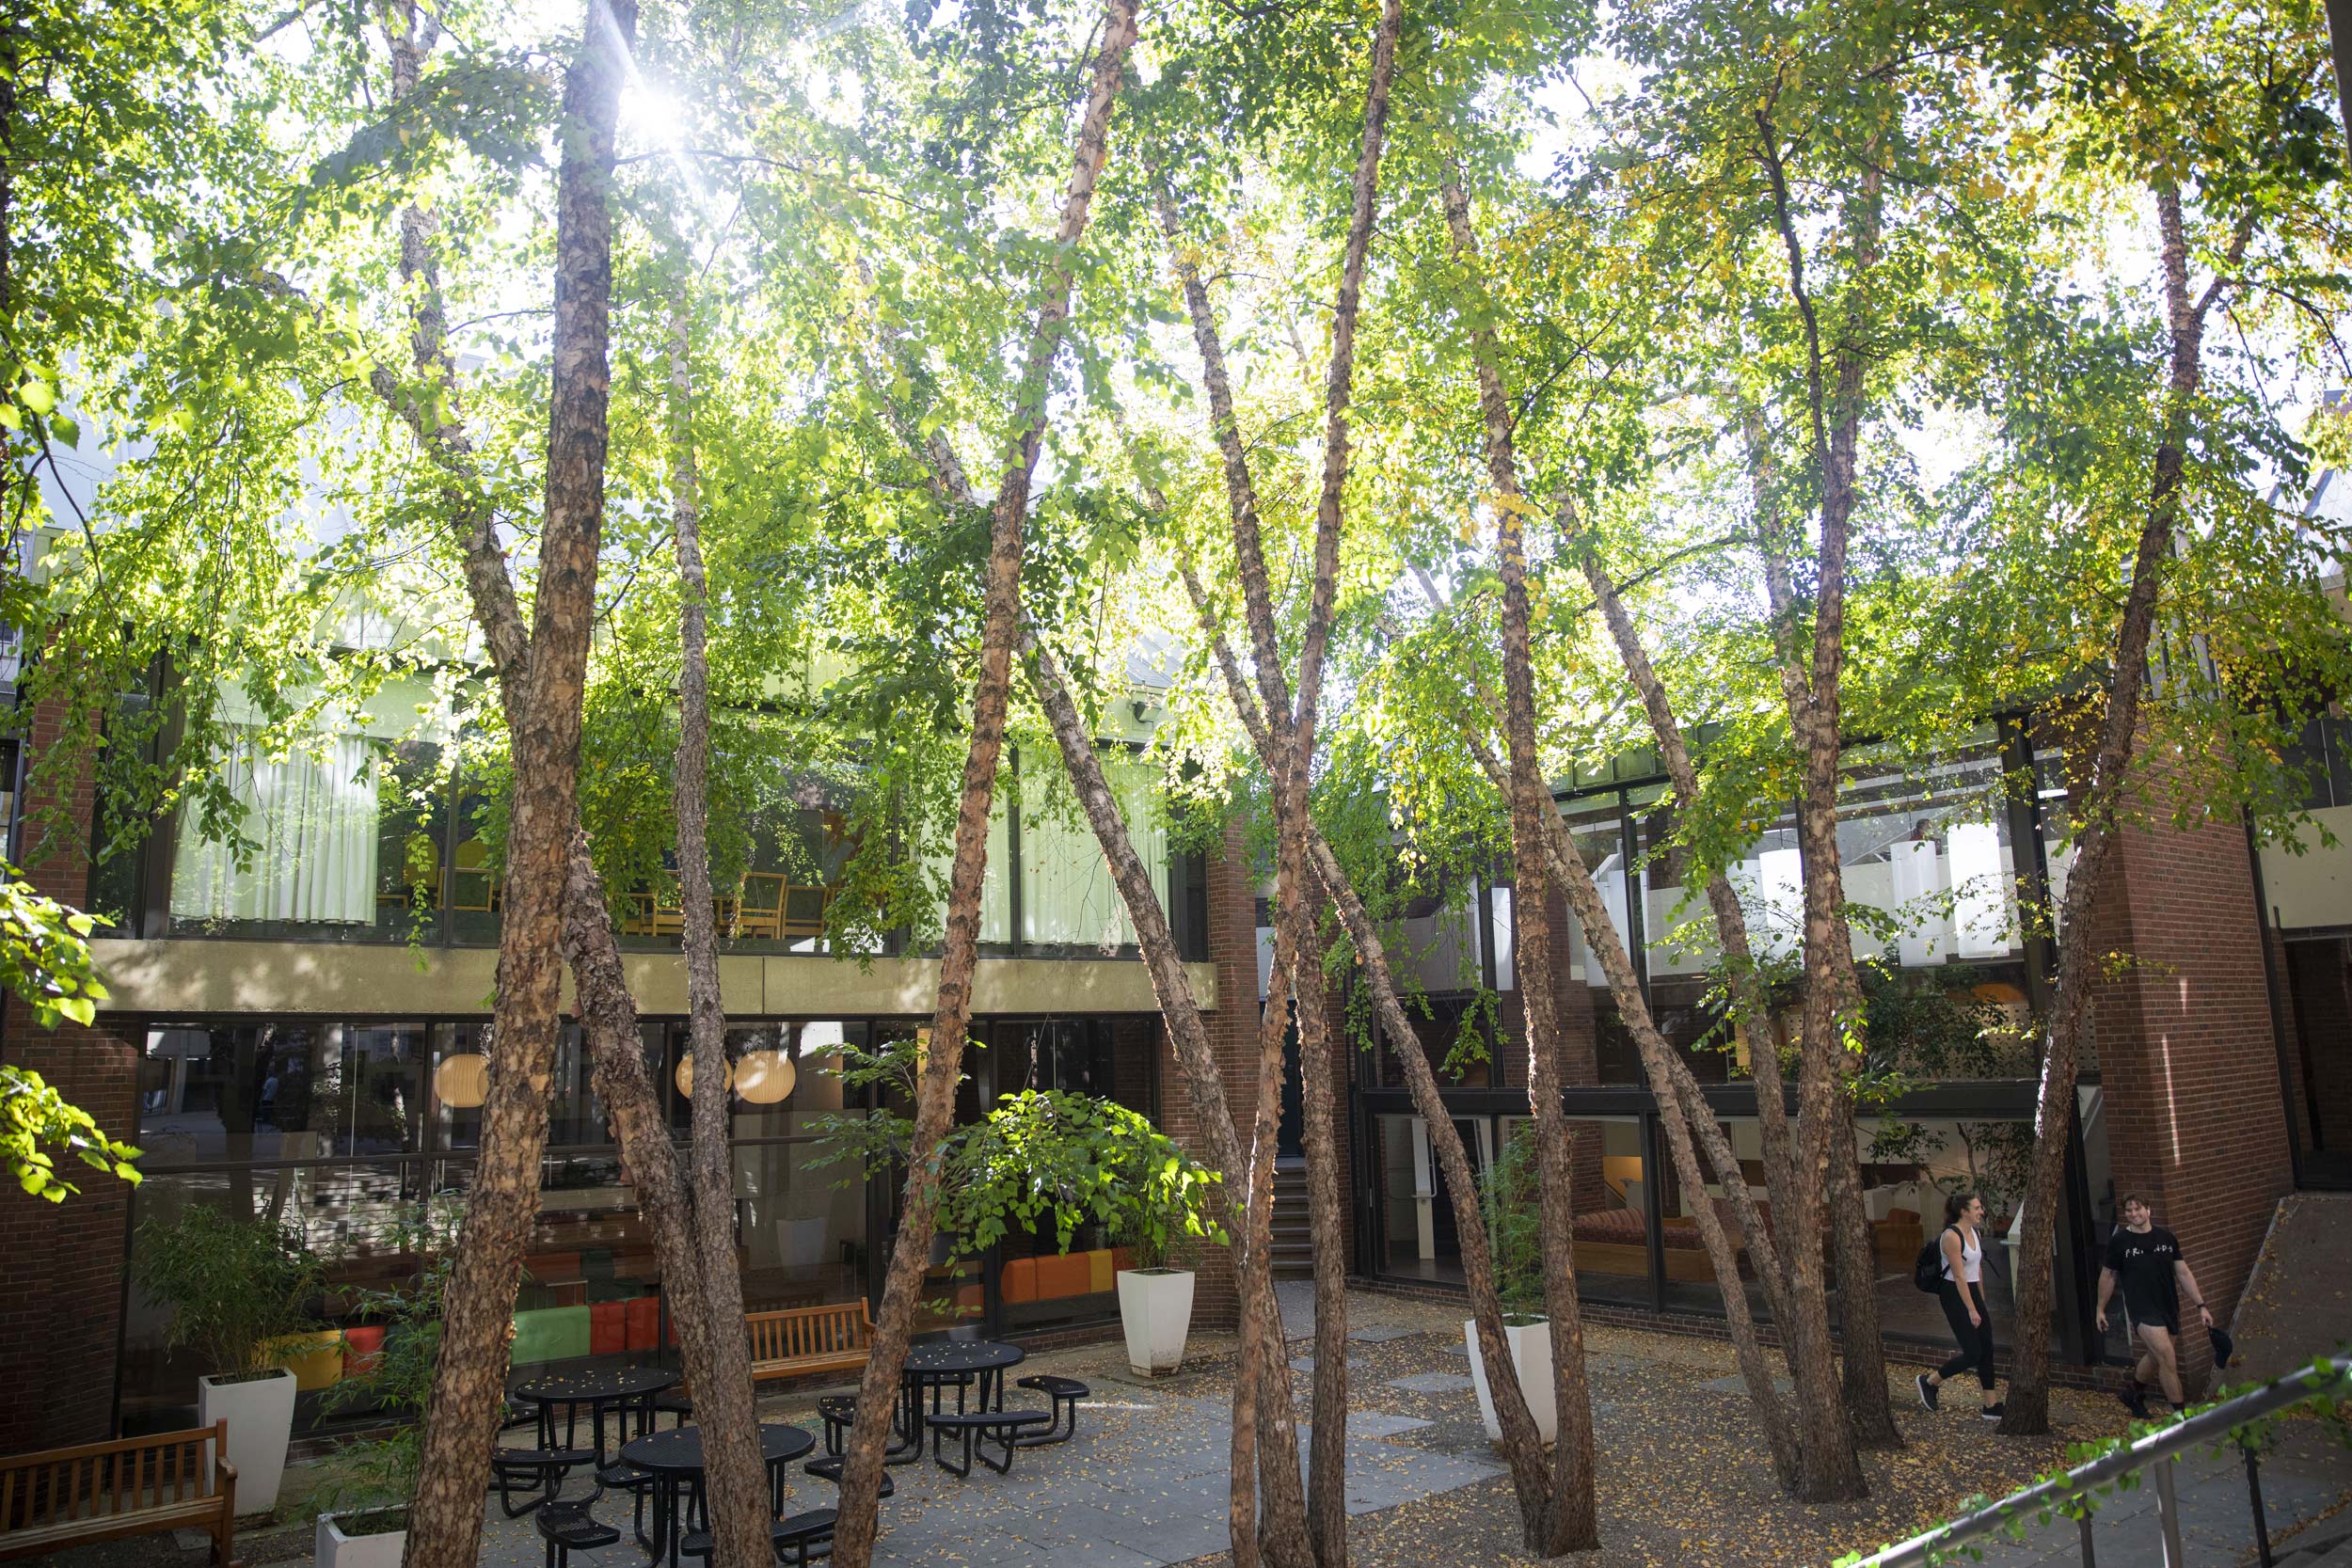 Trees crisscross in the Mather House courtyard.